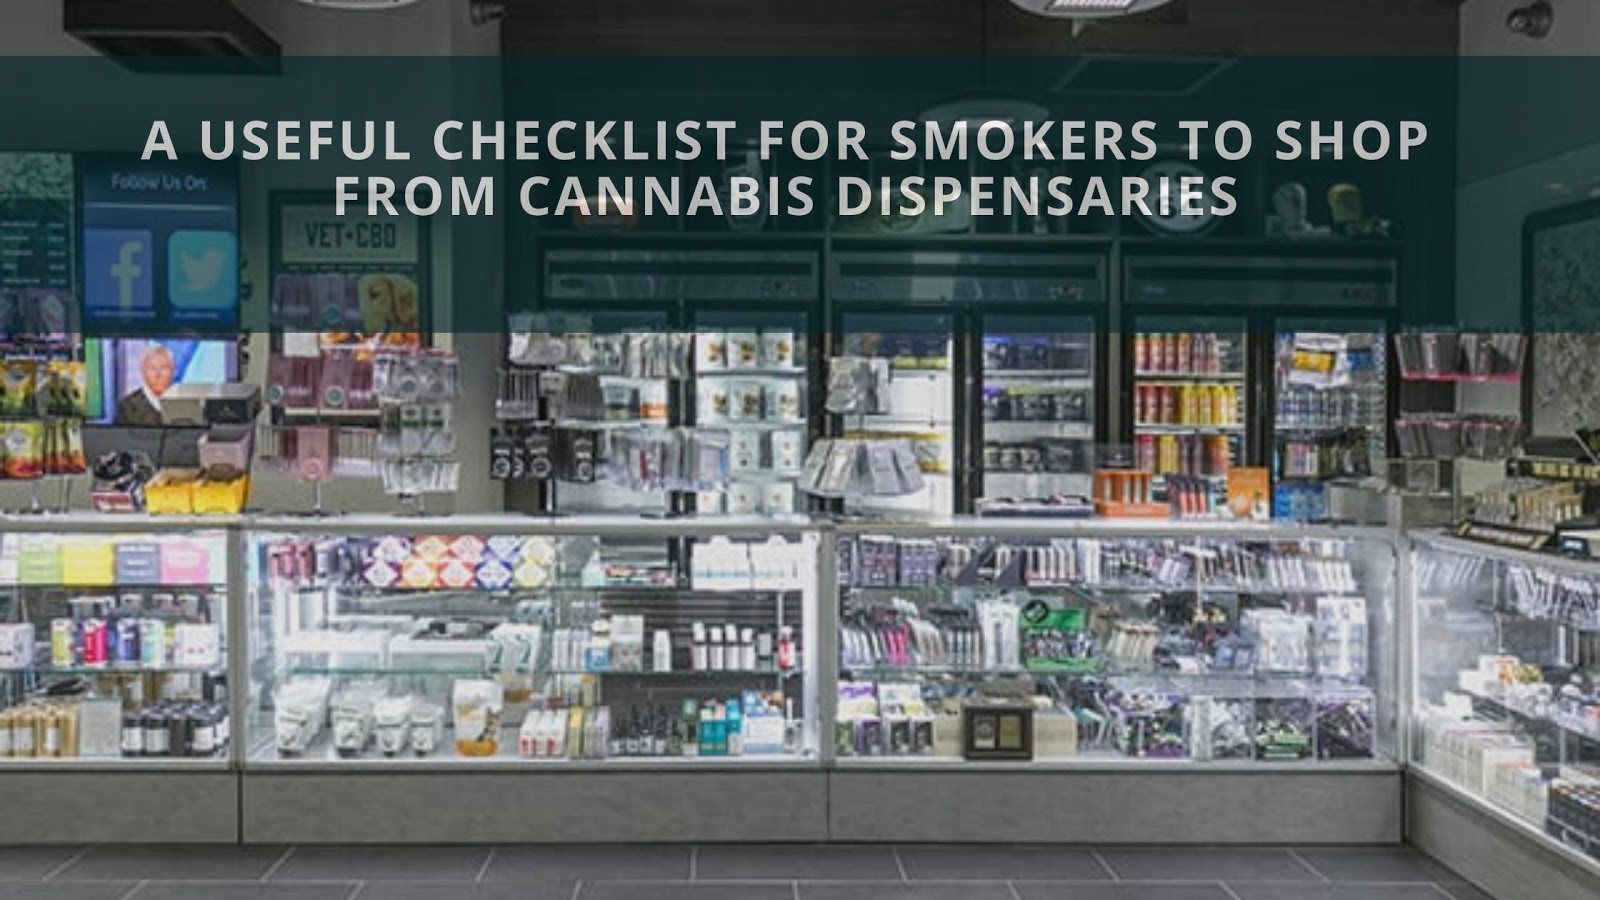 A Useful Checklist for Smokers to Shop from Cannabis Dispensaries